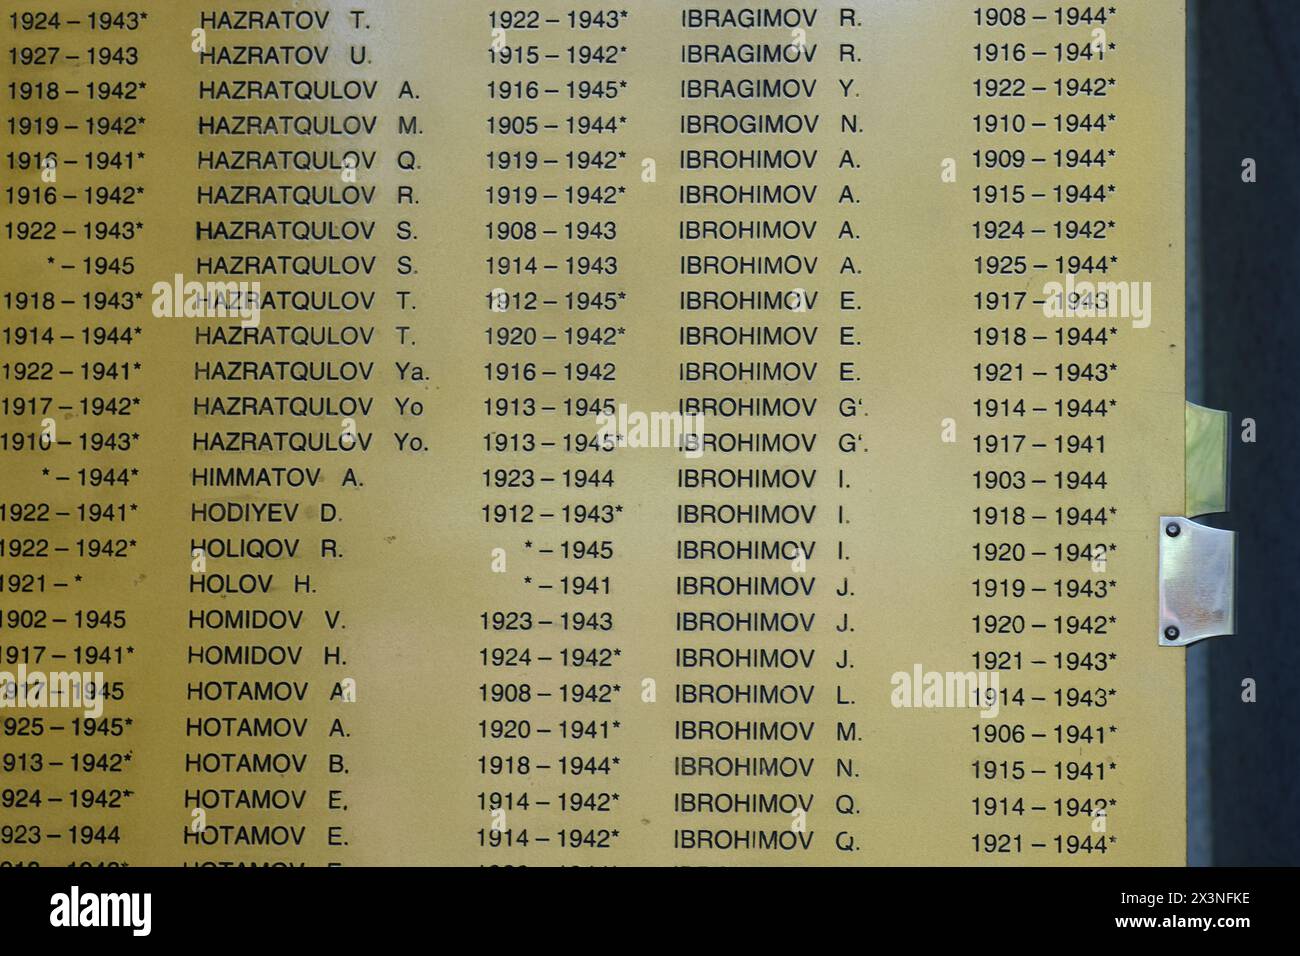 Samarkand Uzbekistan - Names on the memorial to the fallen soldiers from Samarqand Uzbekistan who died fighting for the Soviet Red Army during WW2 Stock Photo